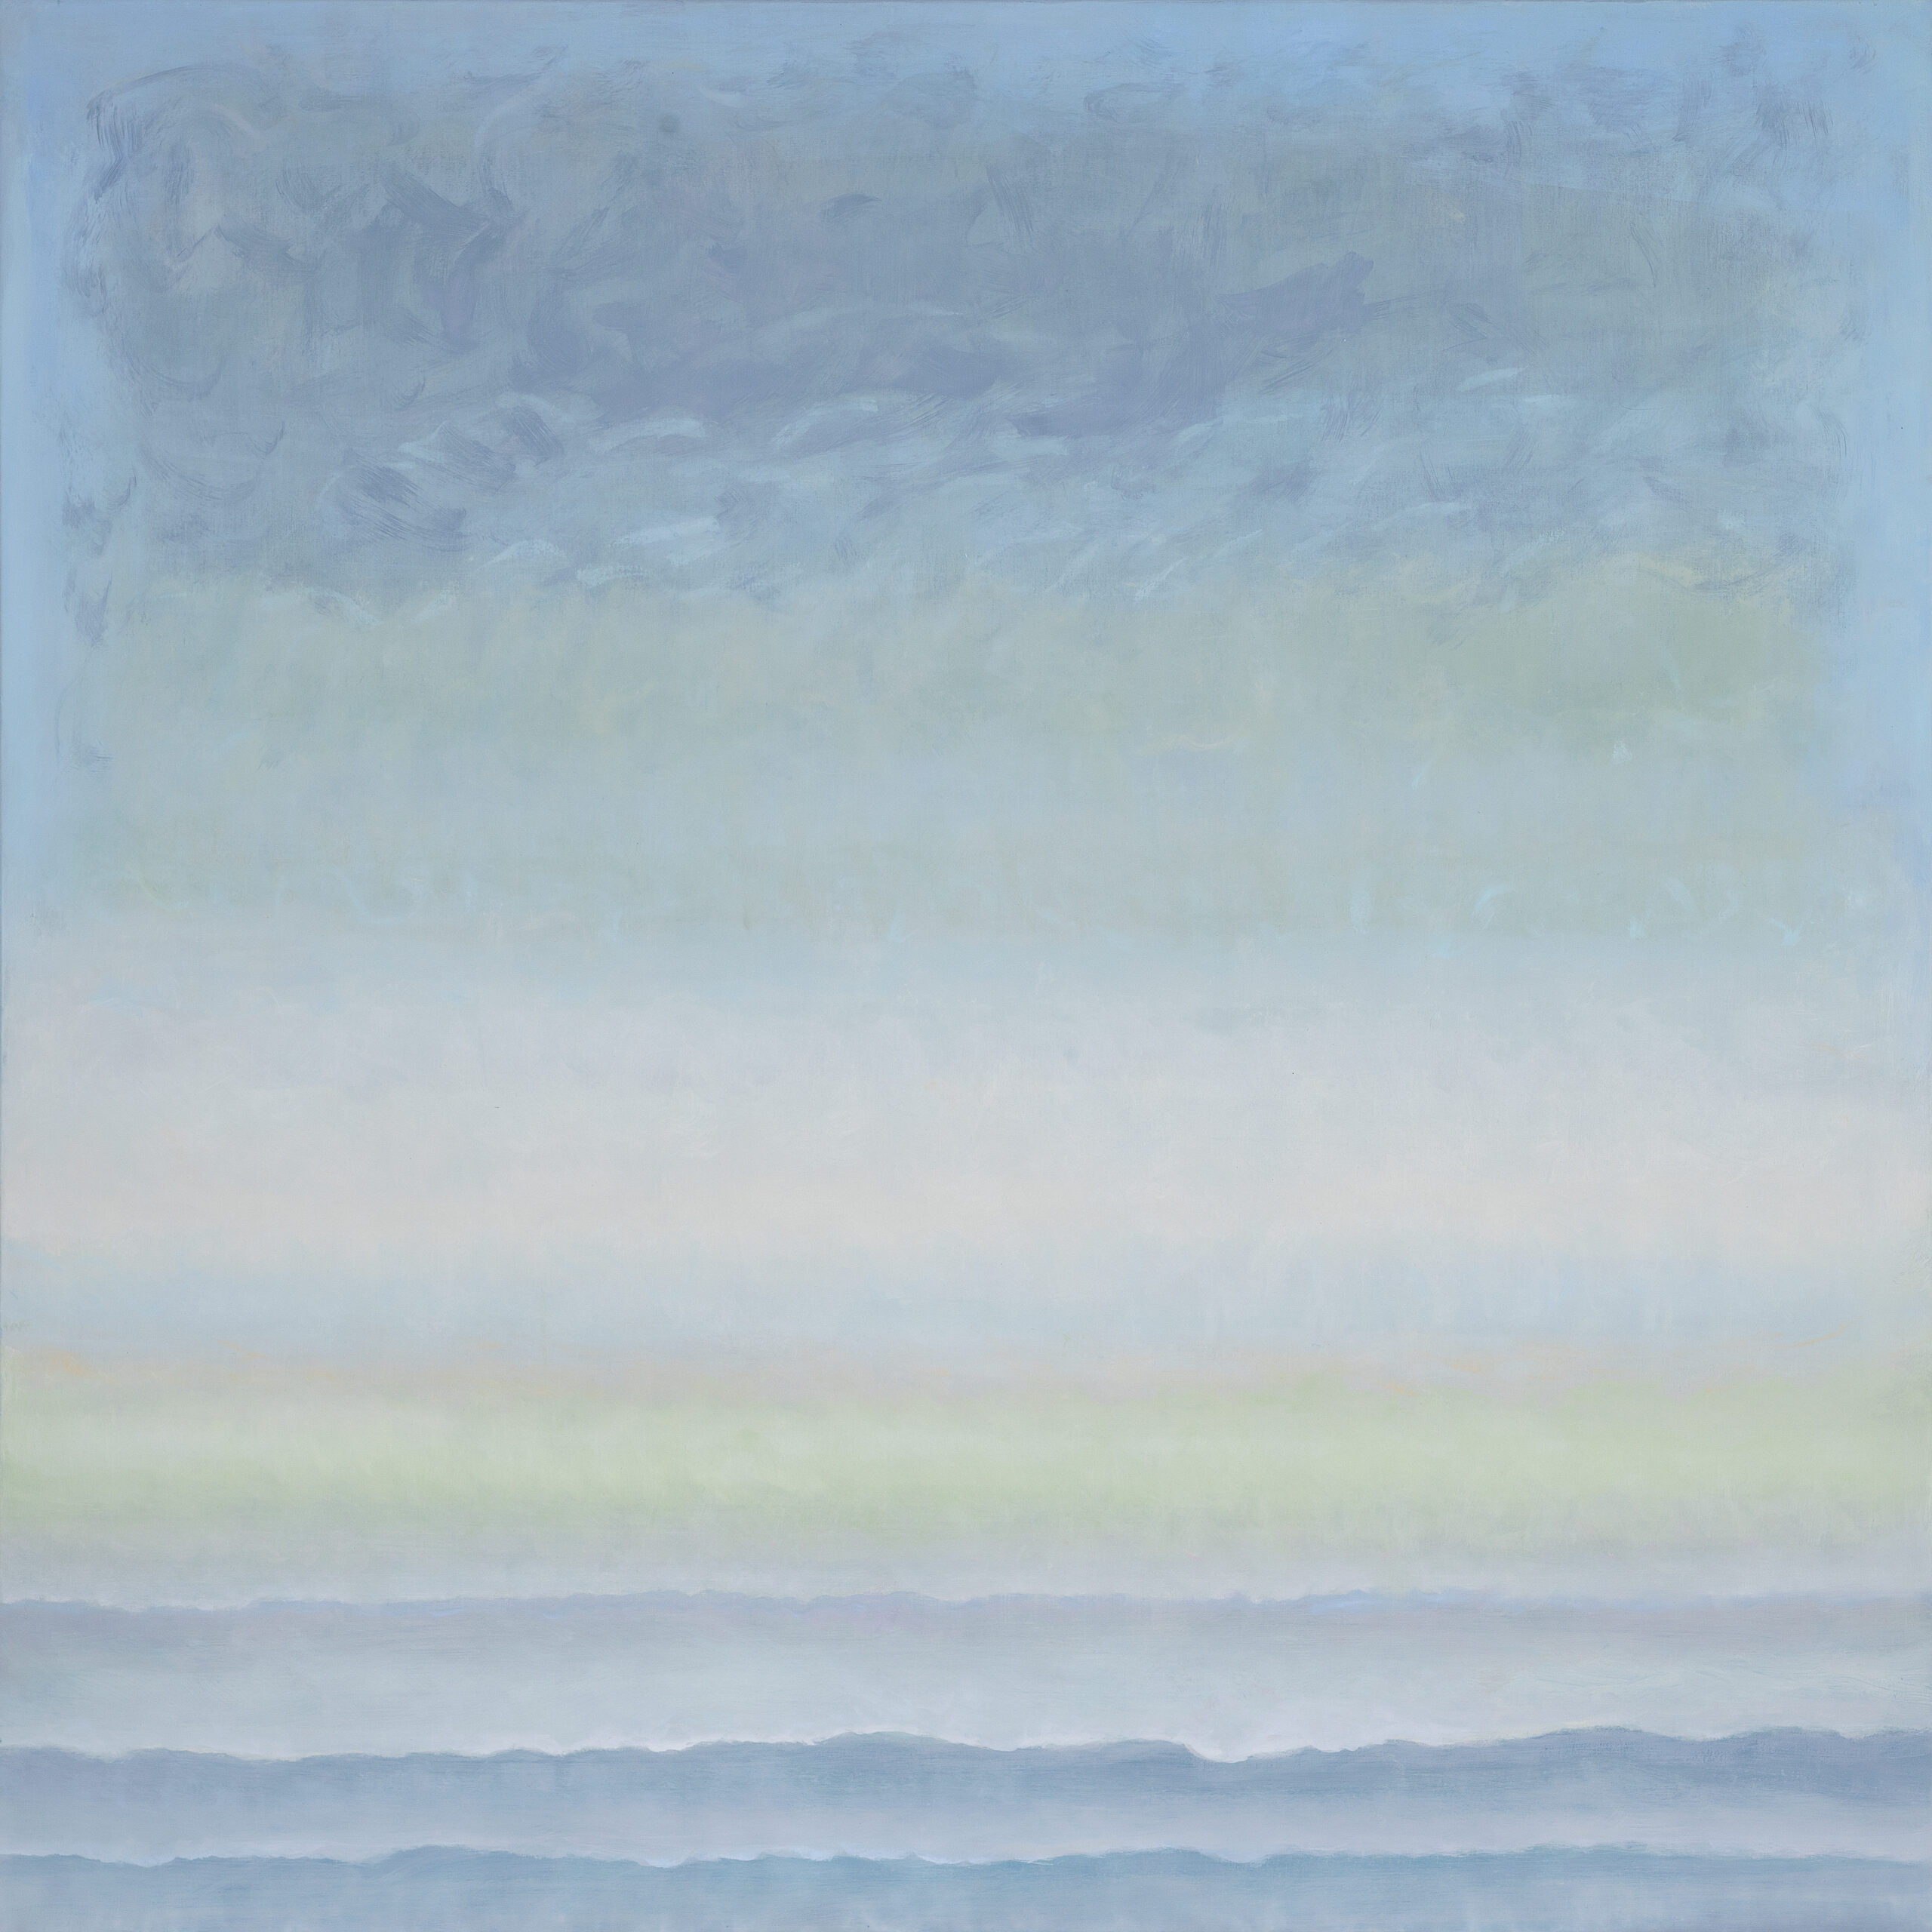 Janet Jennings SEA CLOUD, 2022, 48x48 inches, oil on canvas